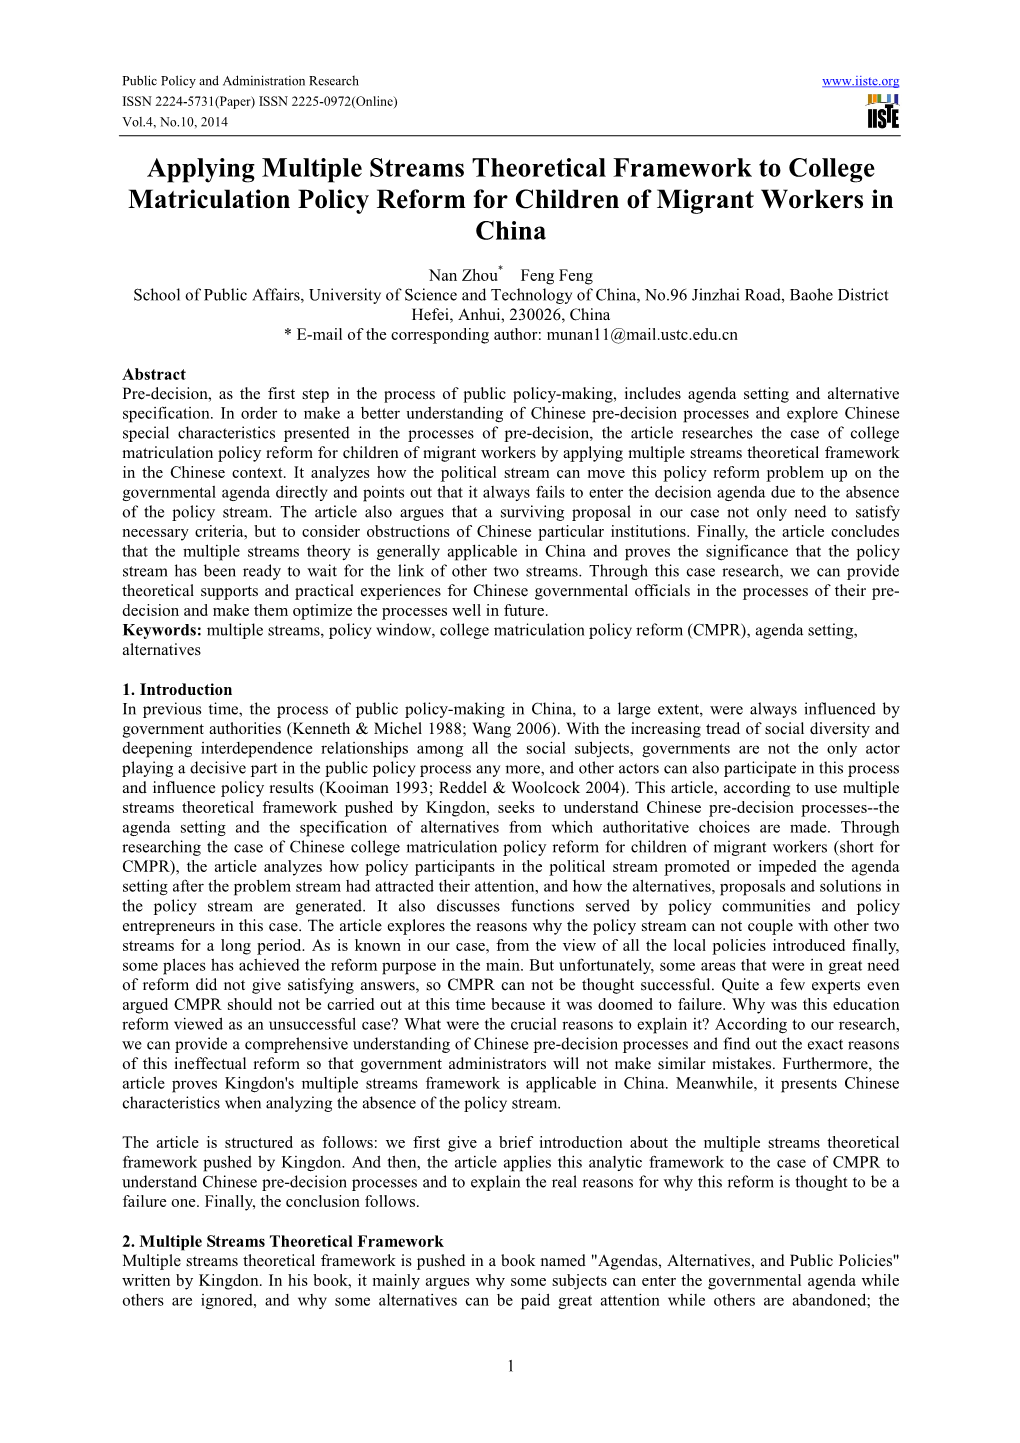 Applying Multiple Streams Theoretical Framework to College Matriculation Policy Reform for Children of Migrant Workers in China